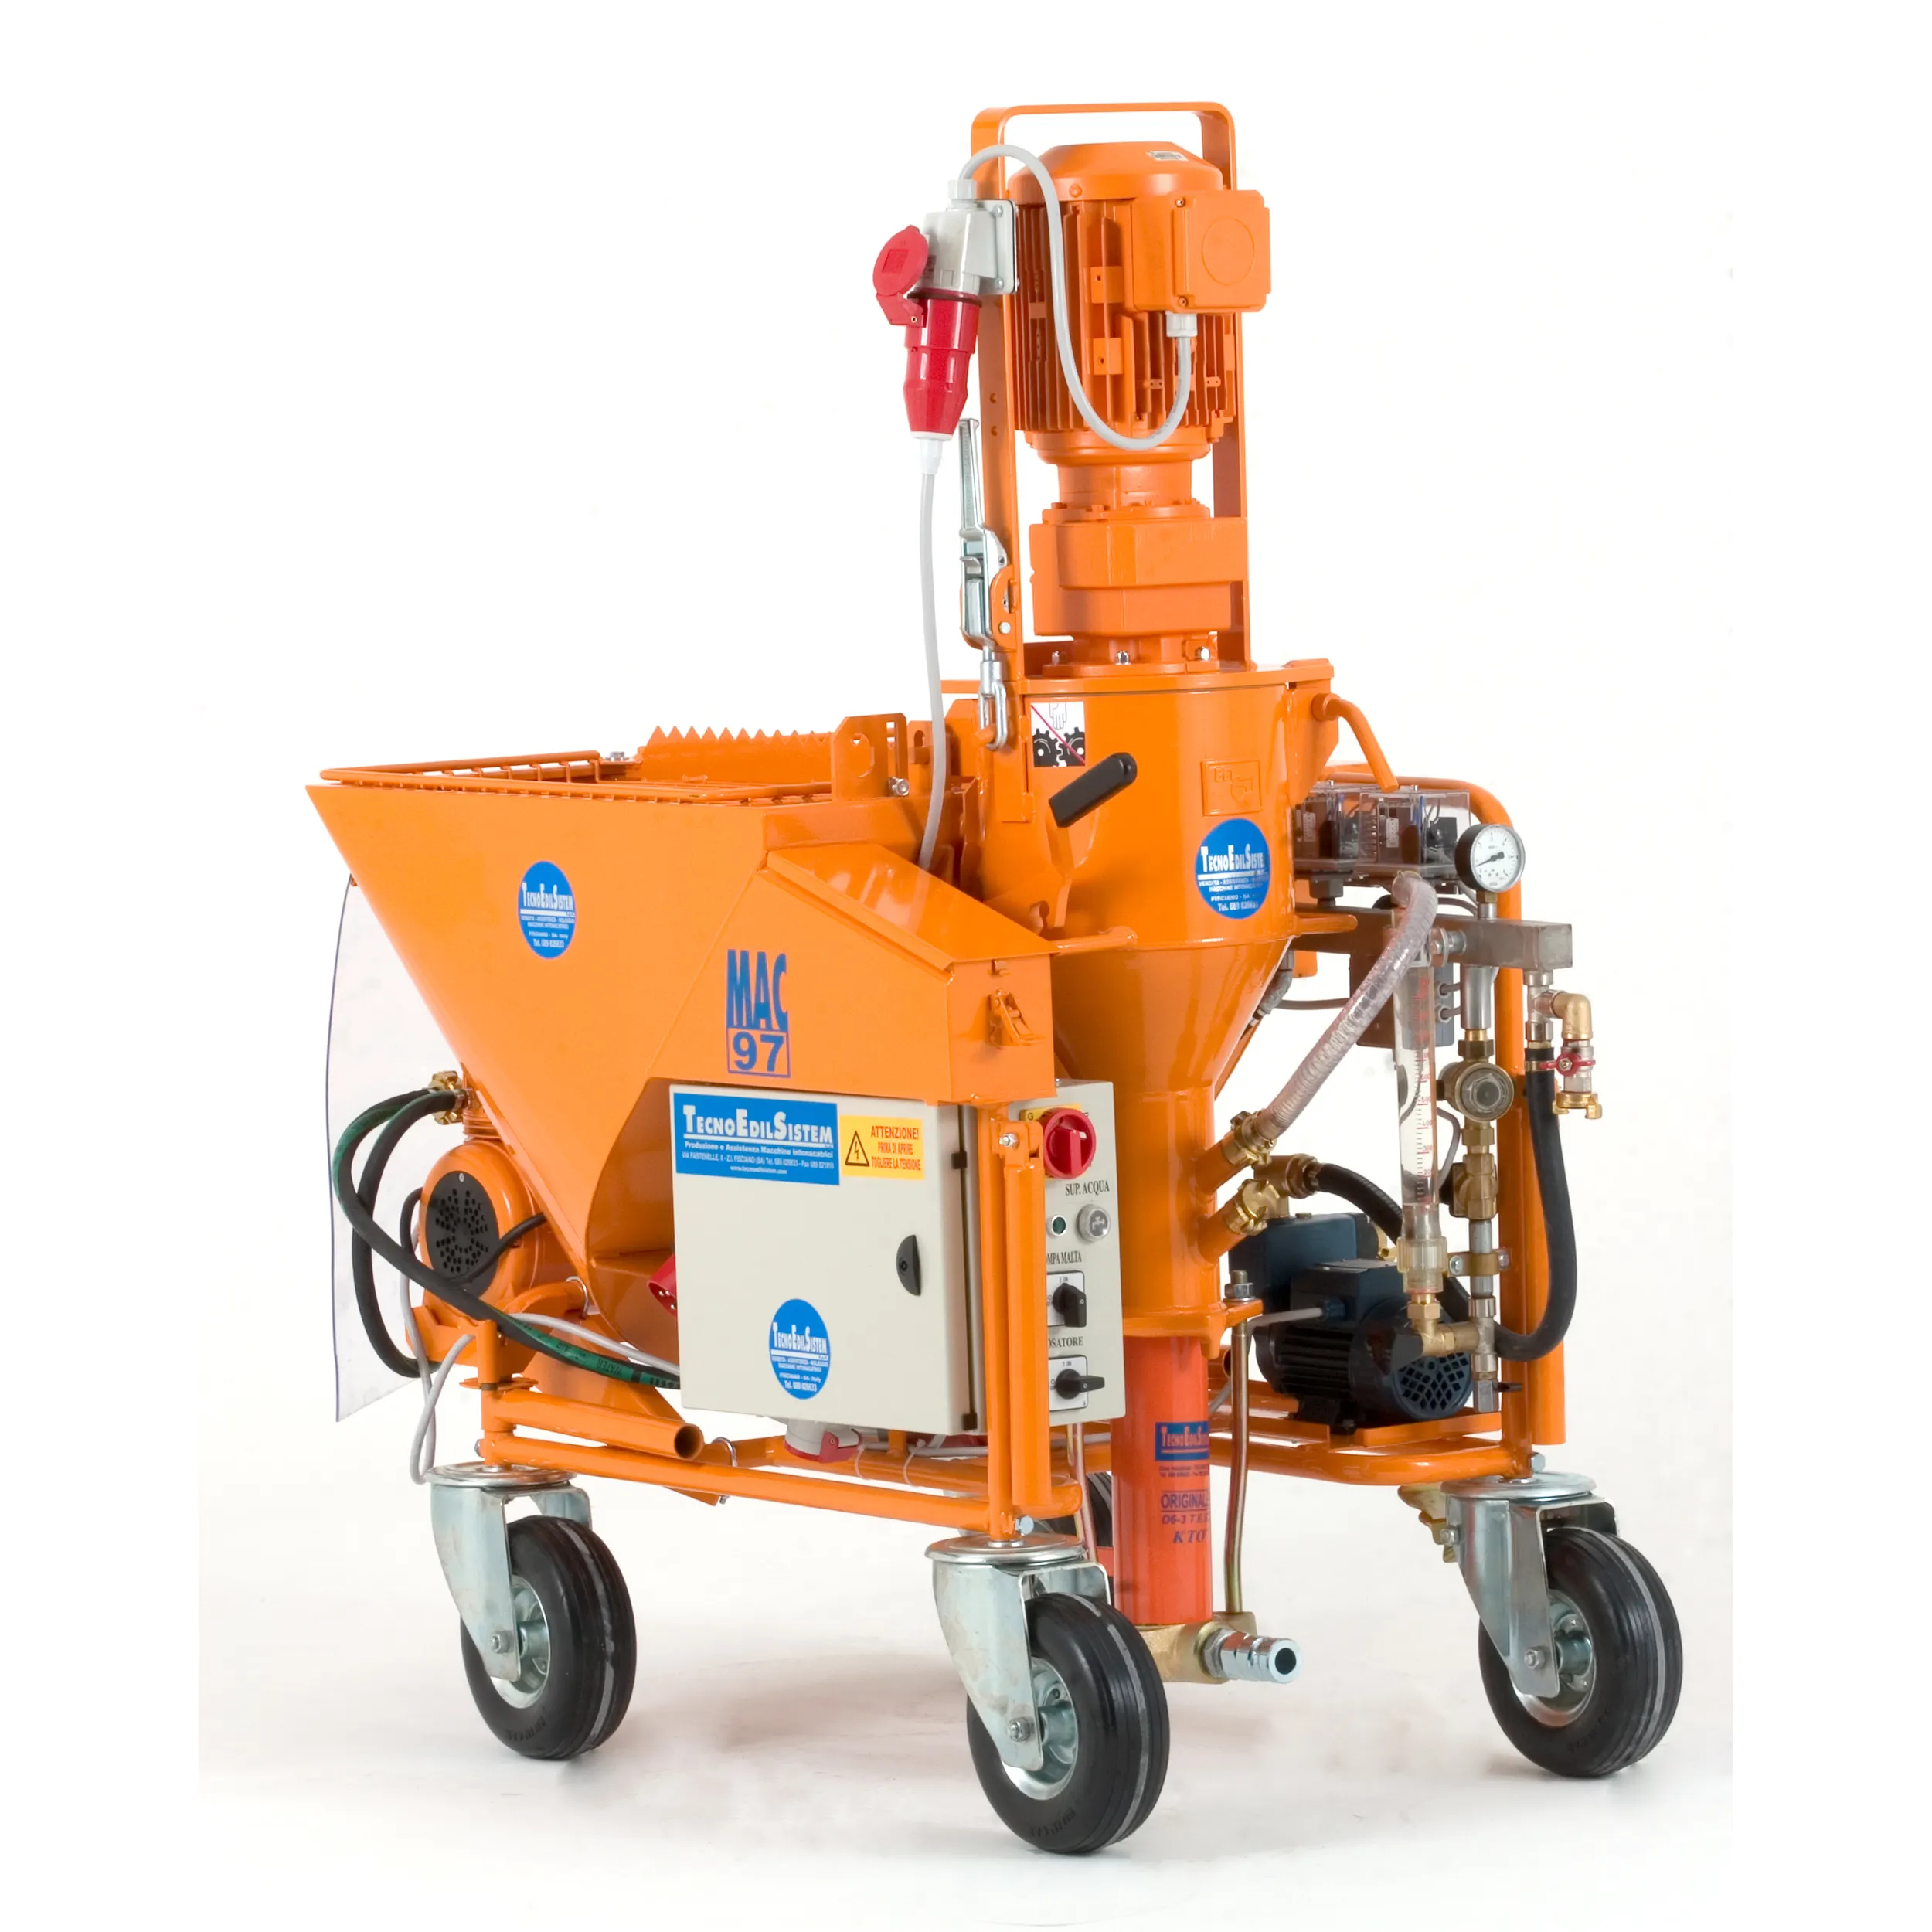 high Italian quality MORTAR PLASTERING MACHINES FOR PLASTER AND CONCRETE MAC 97 400V